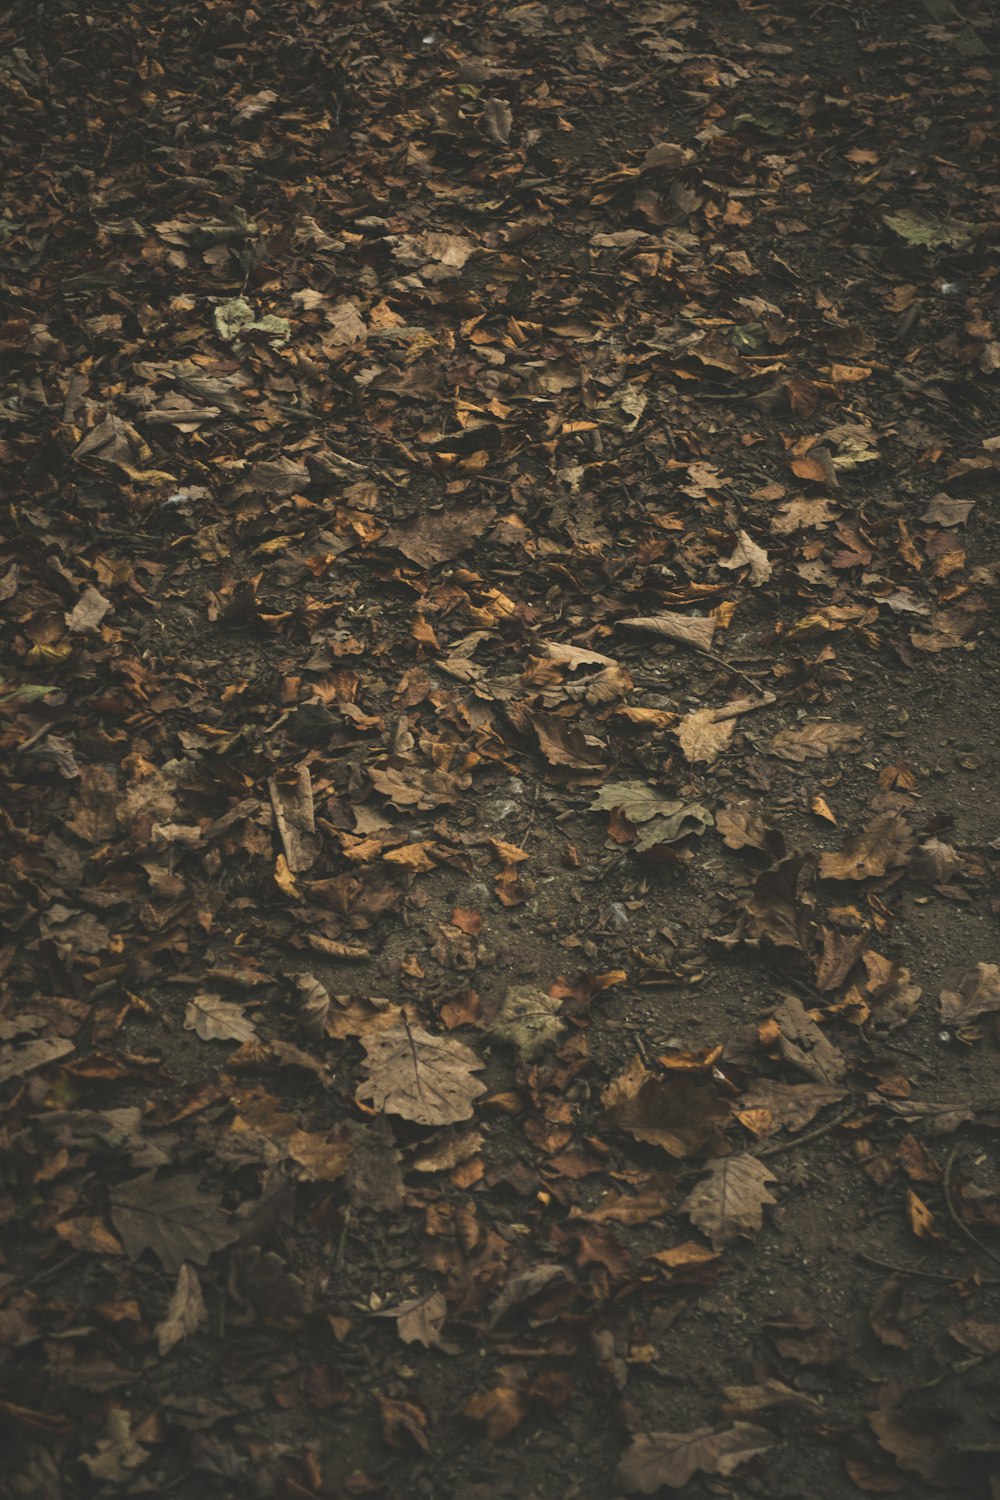 closeup photo of brown leaves on ground